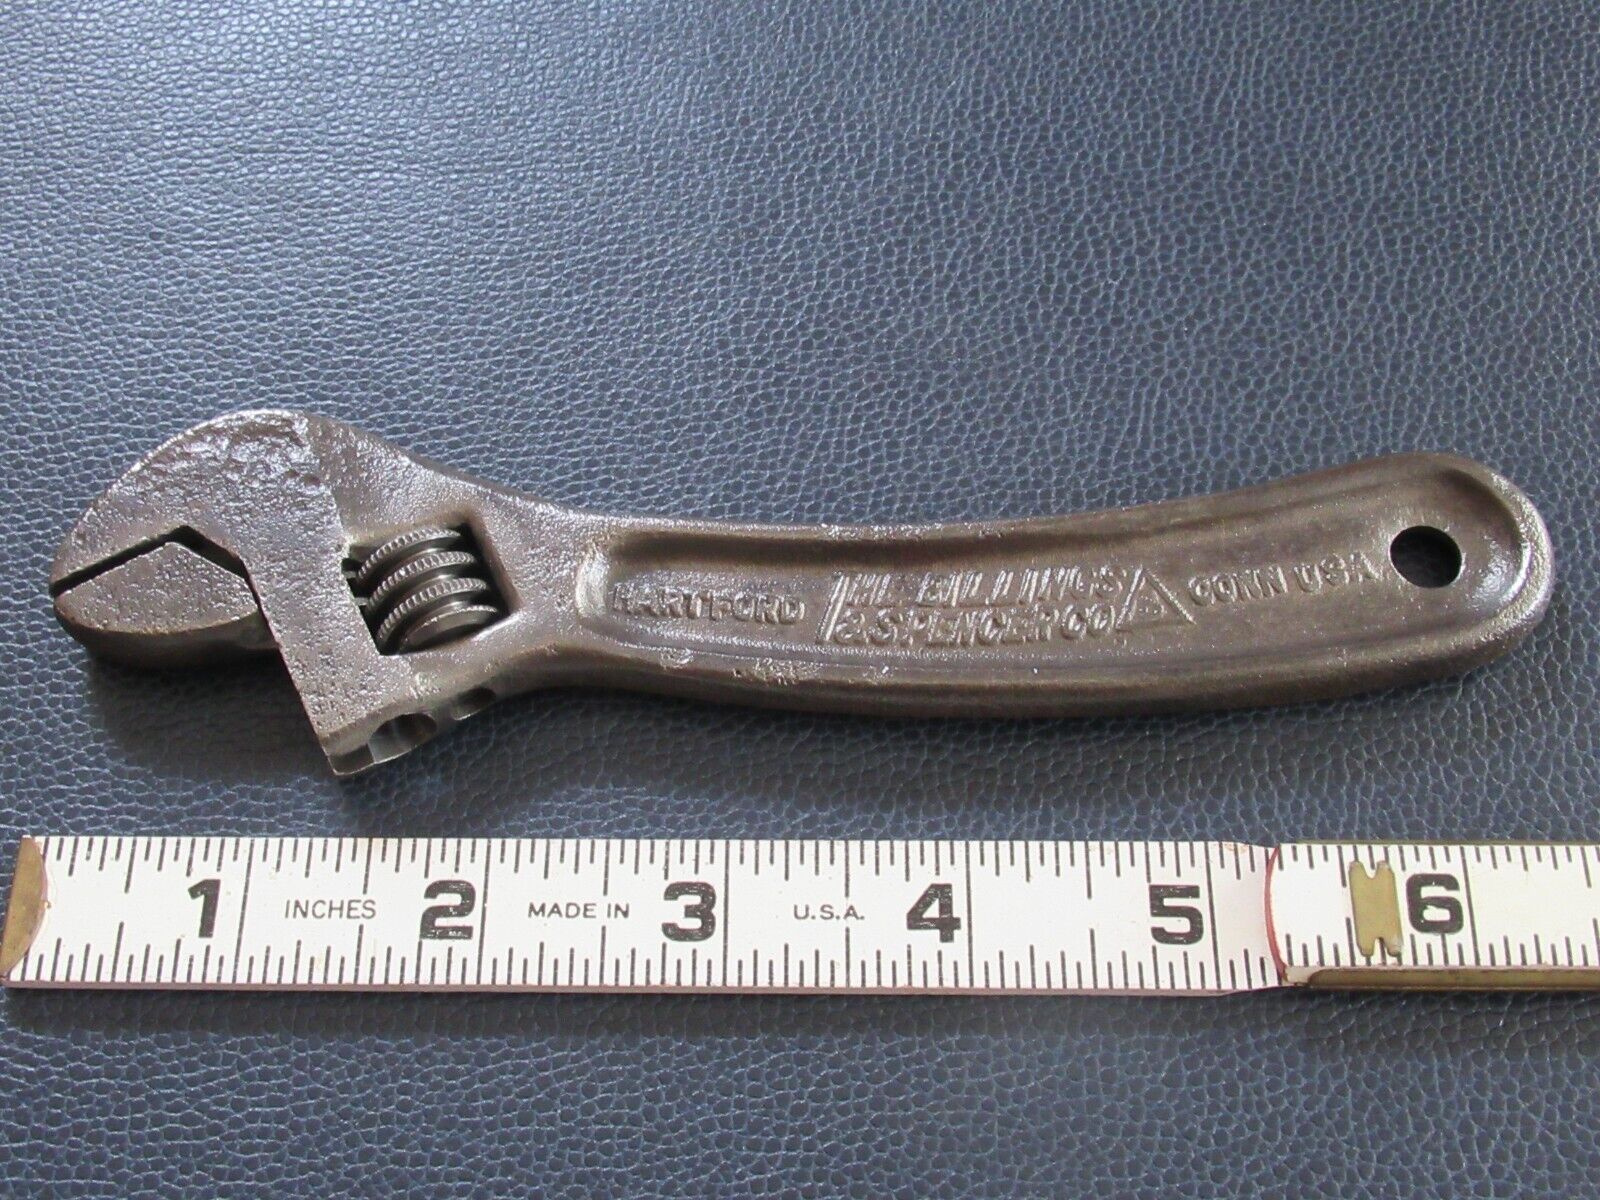 The Billings & Spencer Co. 6 inch curved handle adjustable wrench New Haven Conn